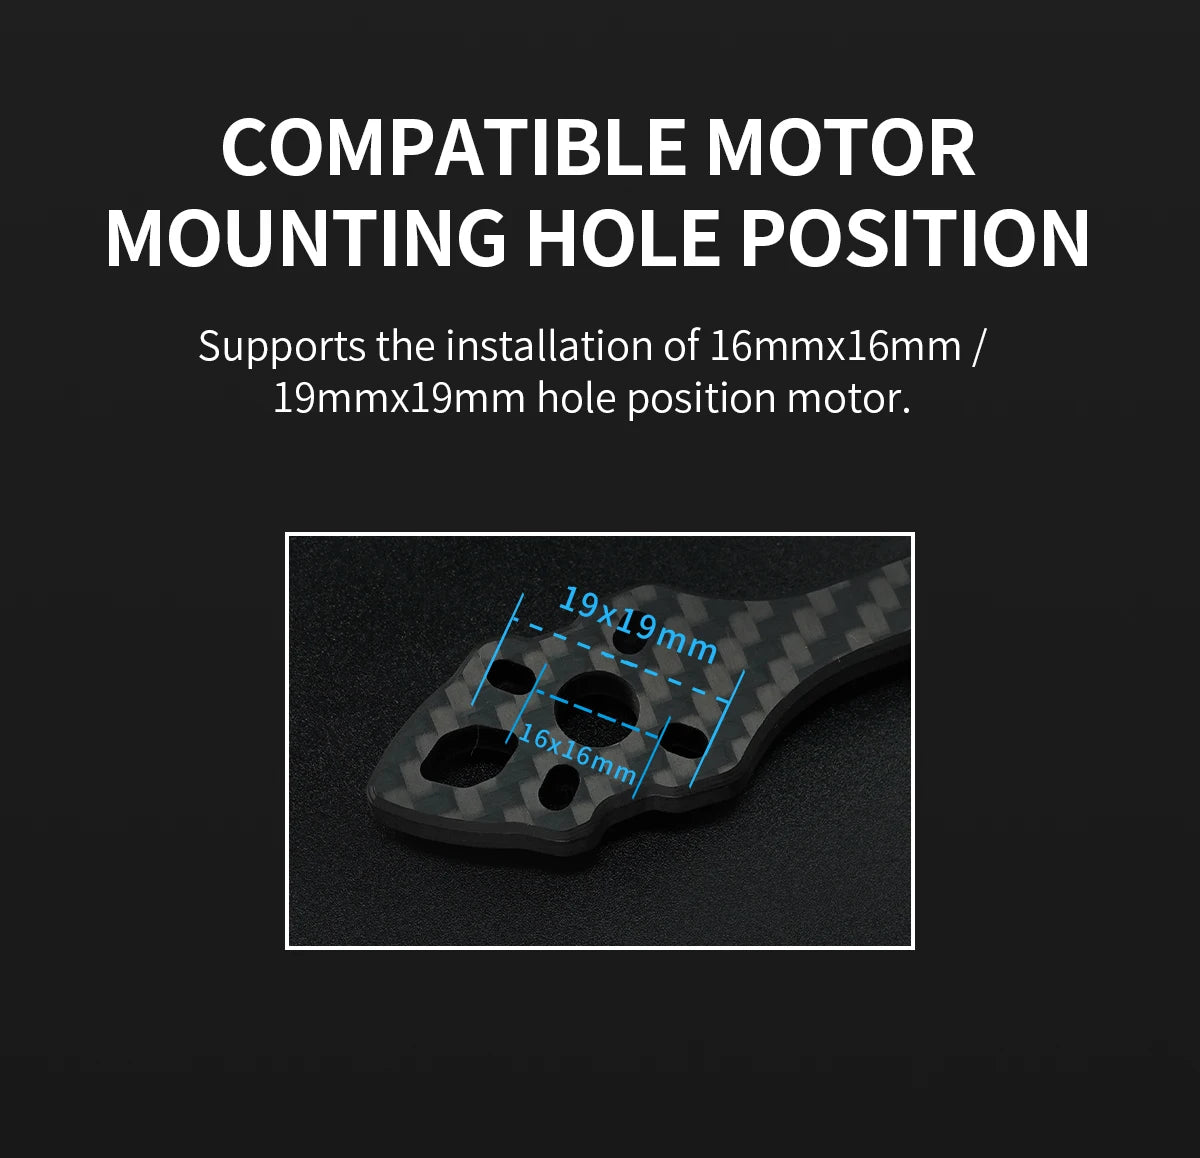 MOTOR MOUNTING HOLE POSITION Supports the installation of 16mm